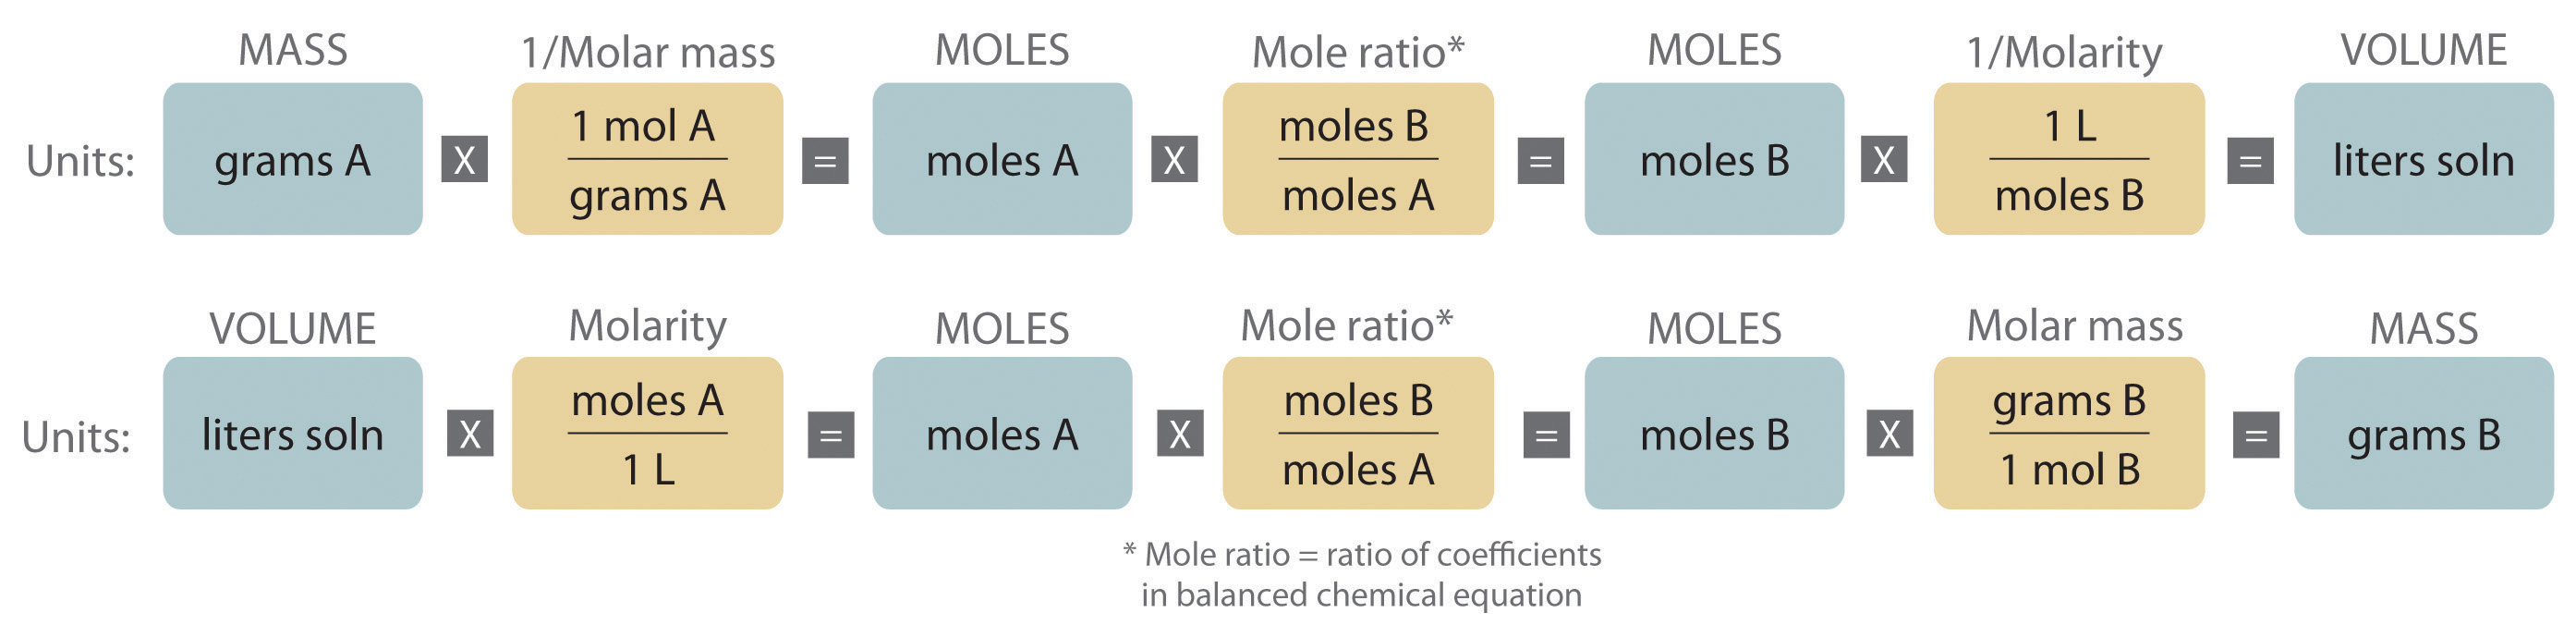 Top: flowchart of steps to convert mass of one substance to moles to moles of another substance to volume using molarity. Bottom: flowchart of steps to convert volume of a substance to mass of another substance.